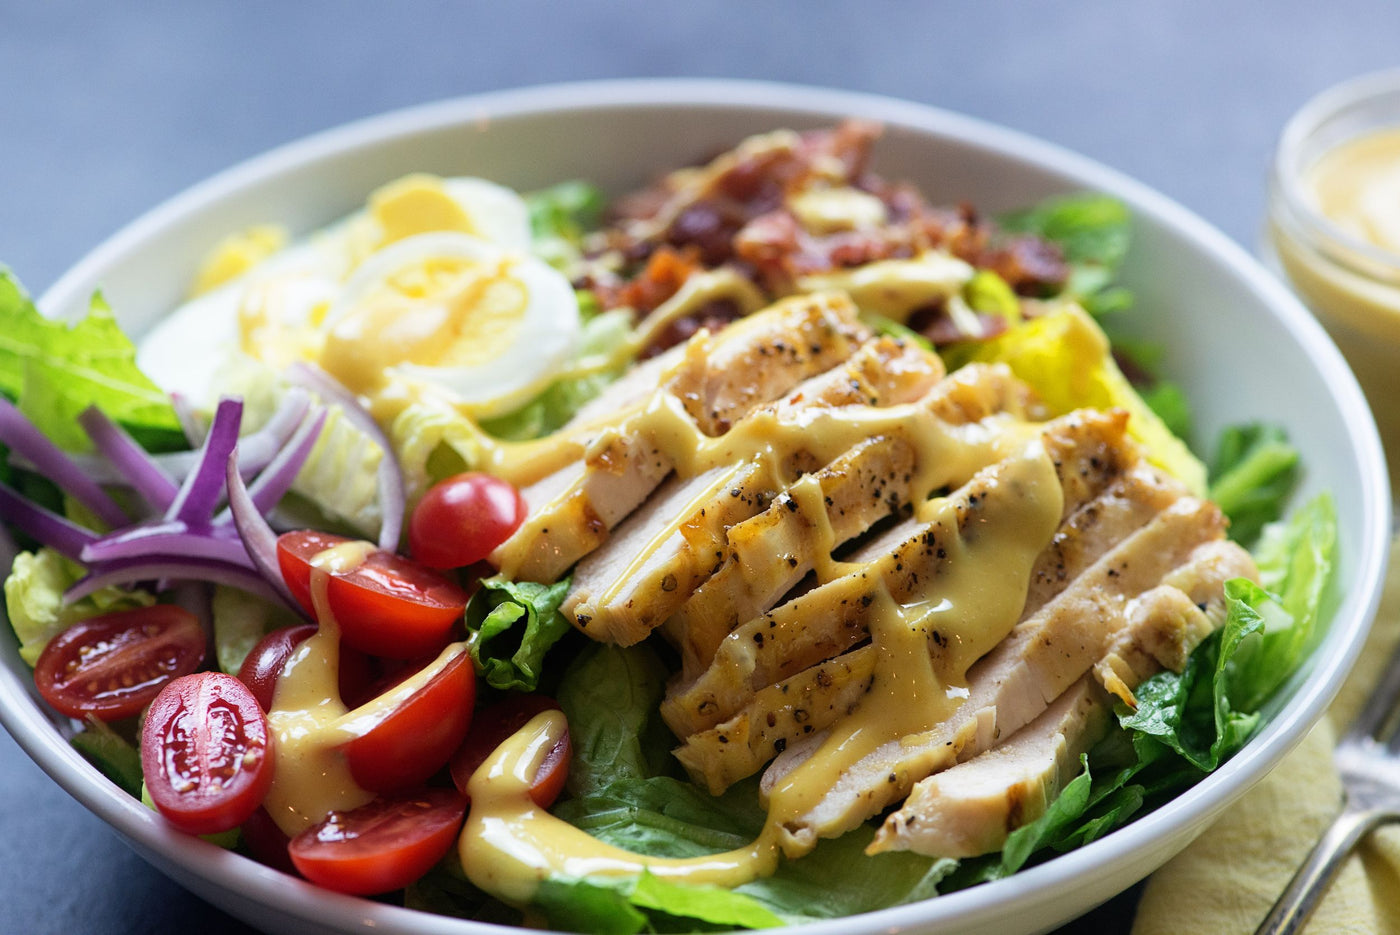 Chicken over salad with mustard based dressing